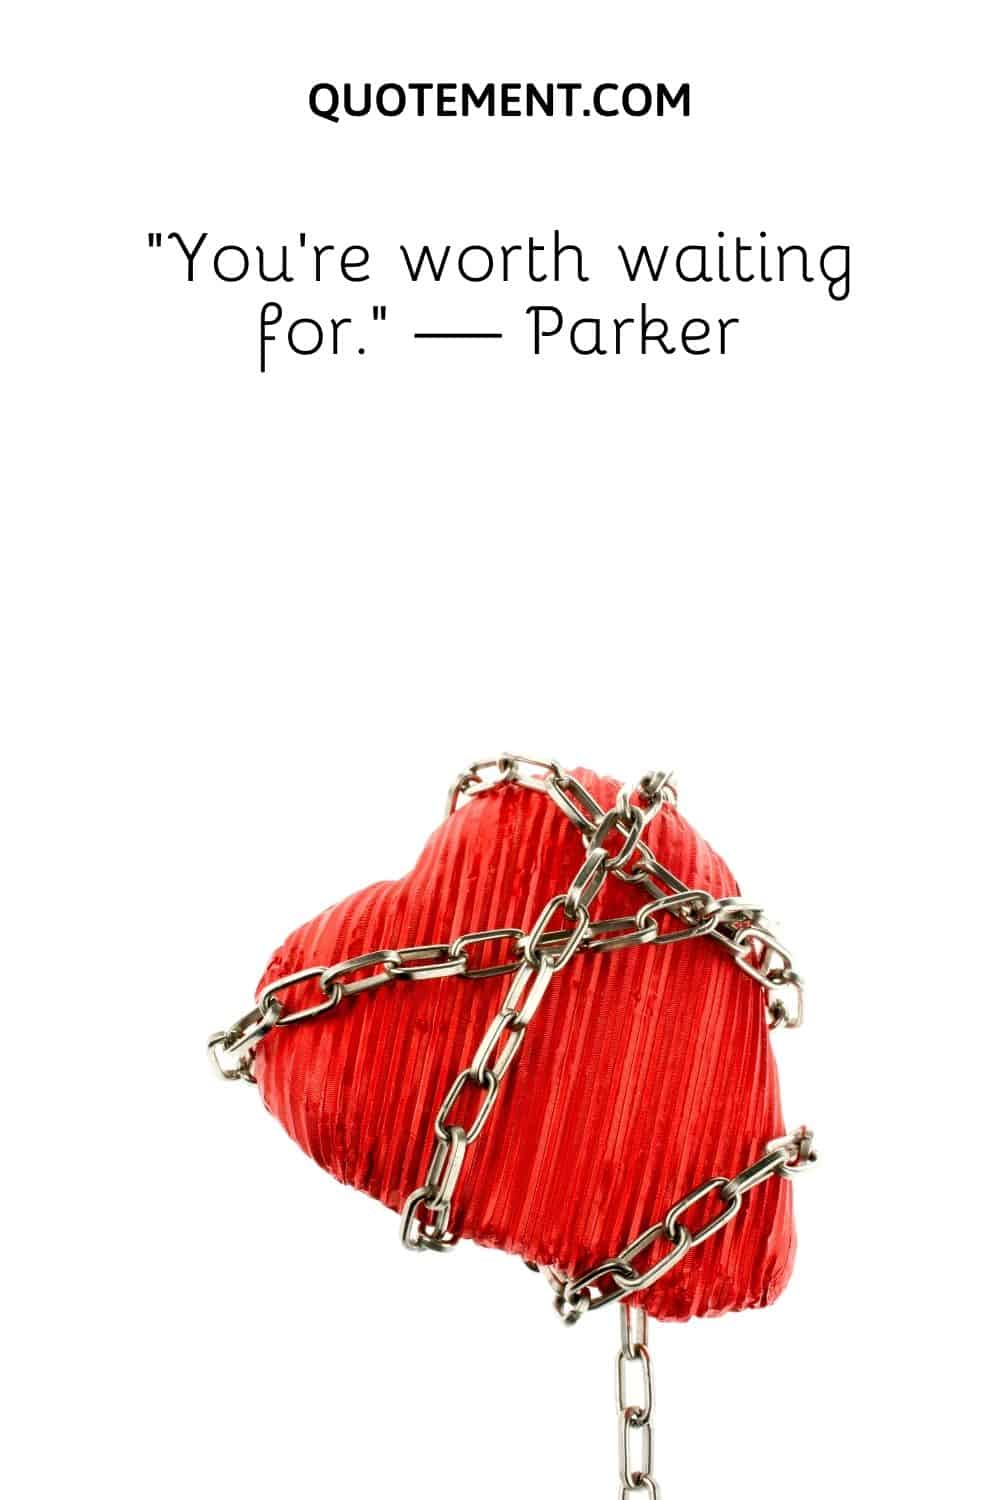 “You’re worth waiting for.” — Parker